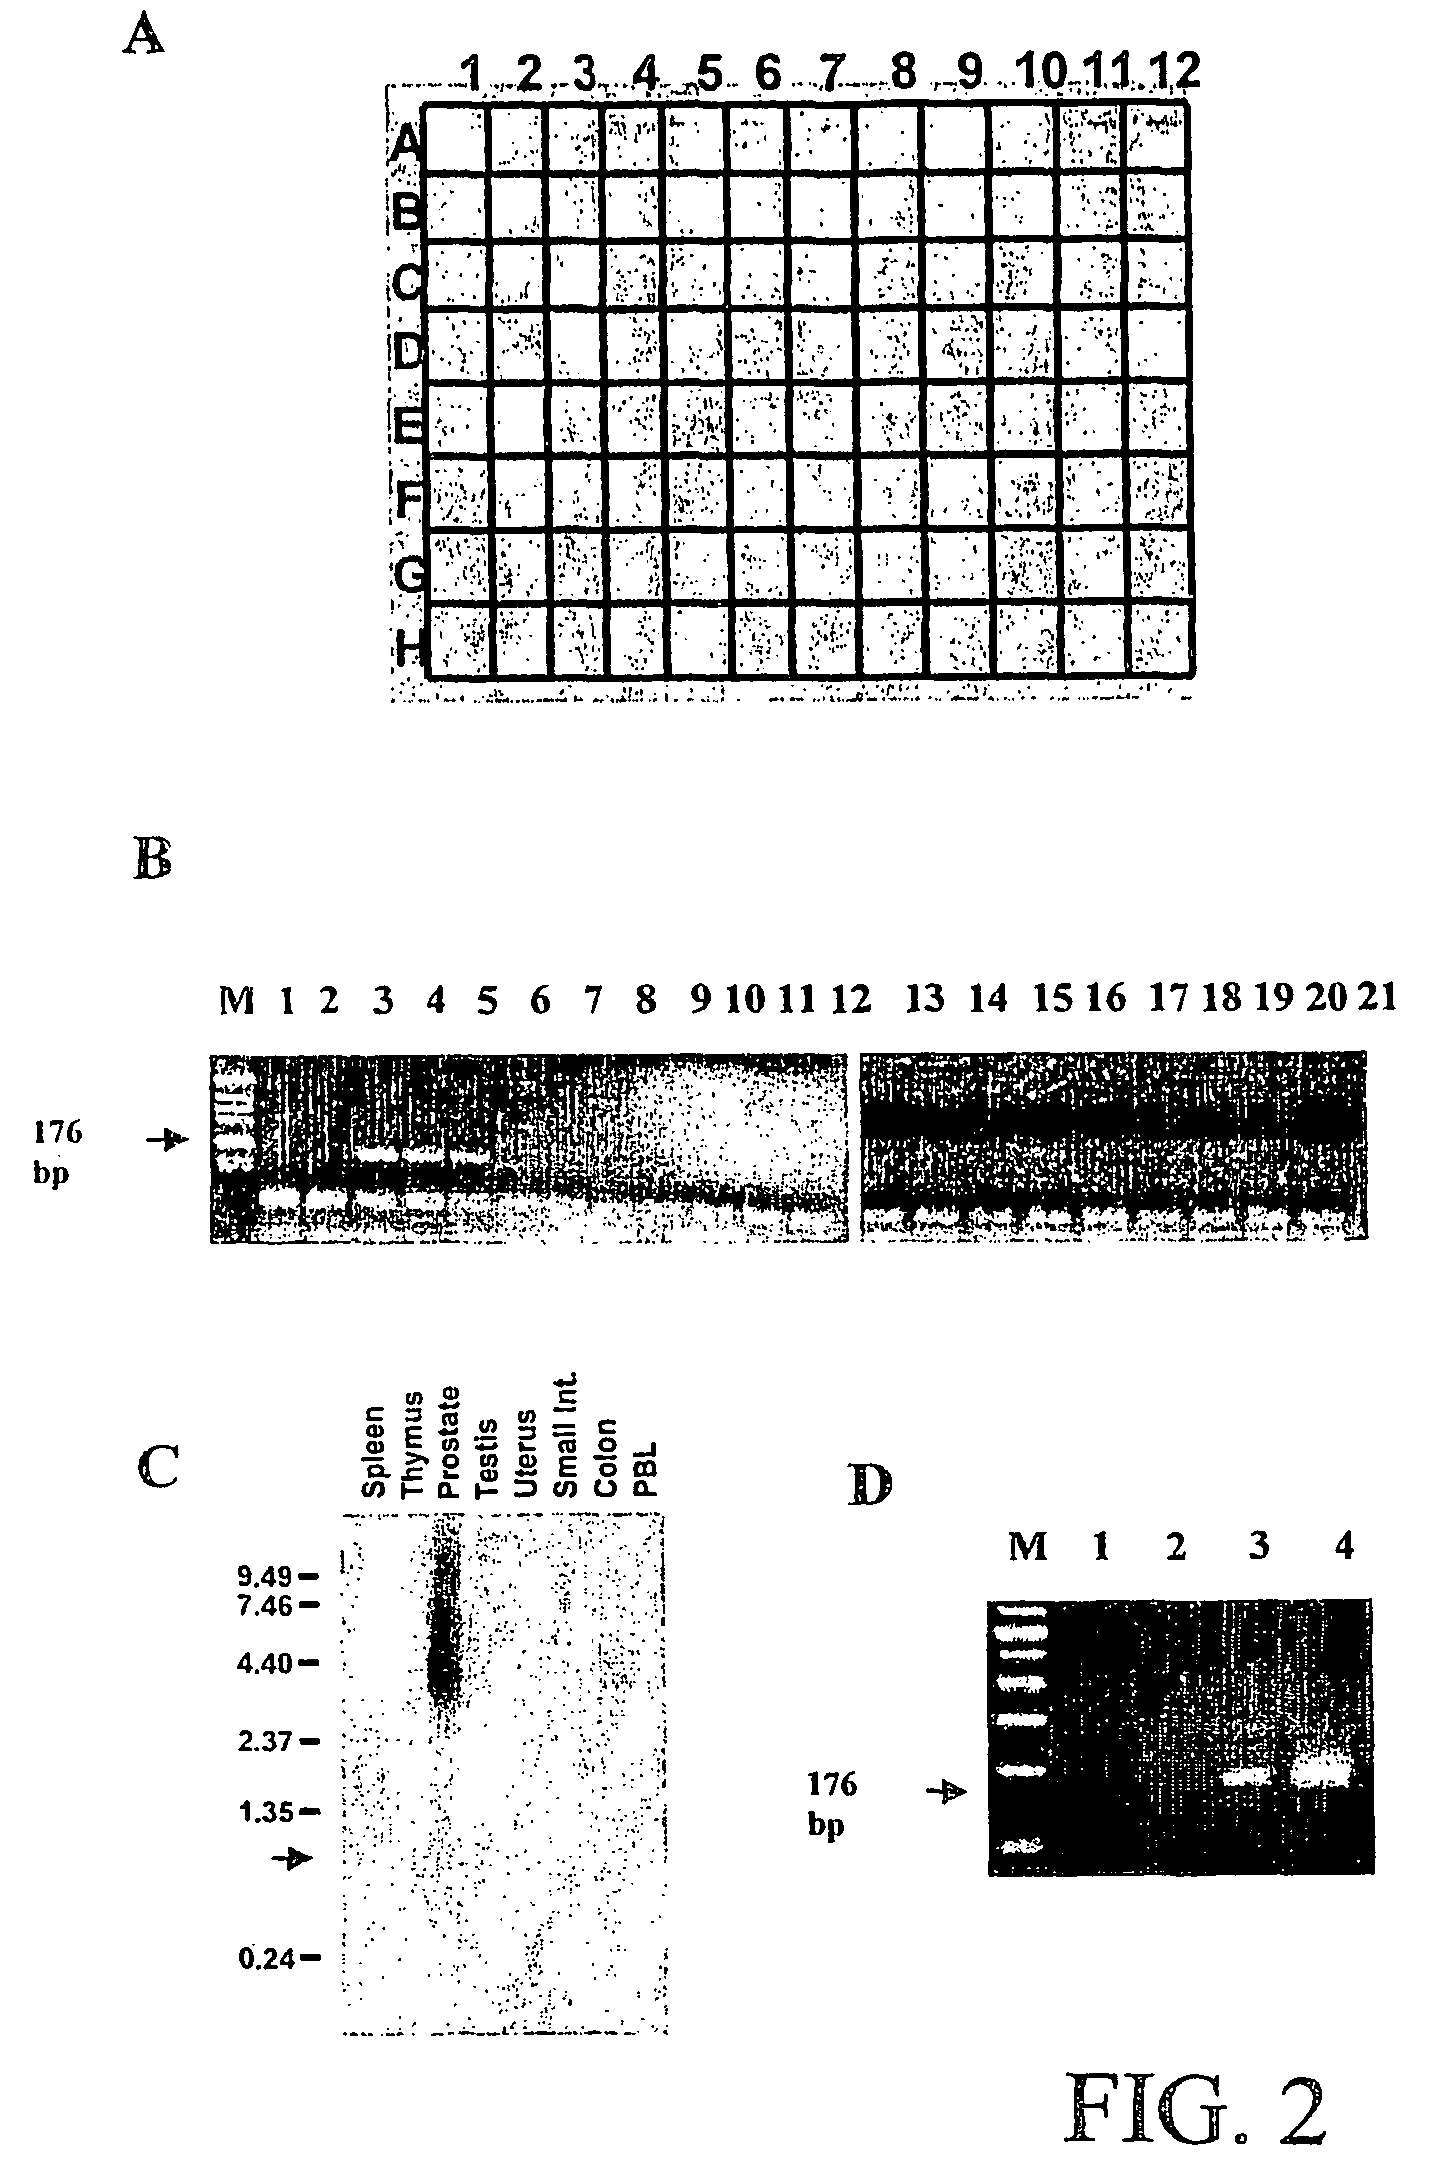 Gene expressed in prostate cancer and methods of use